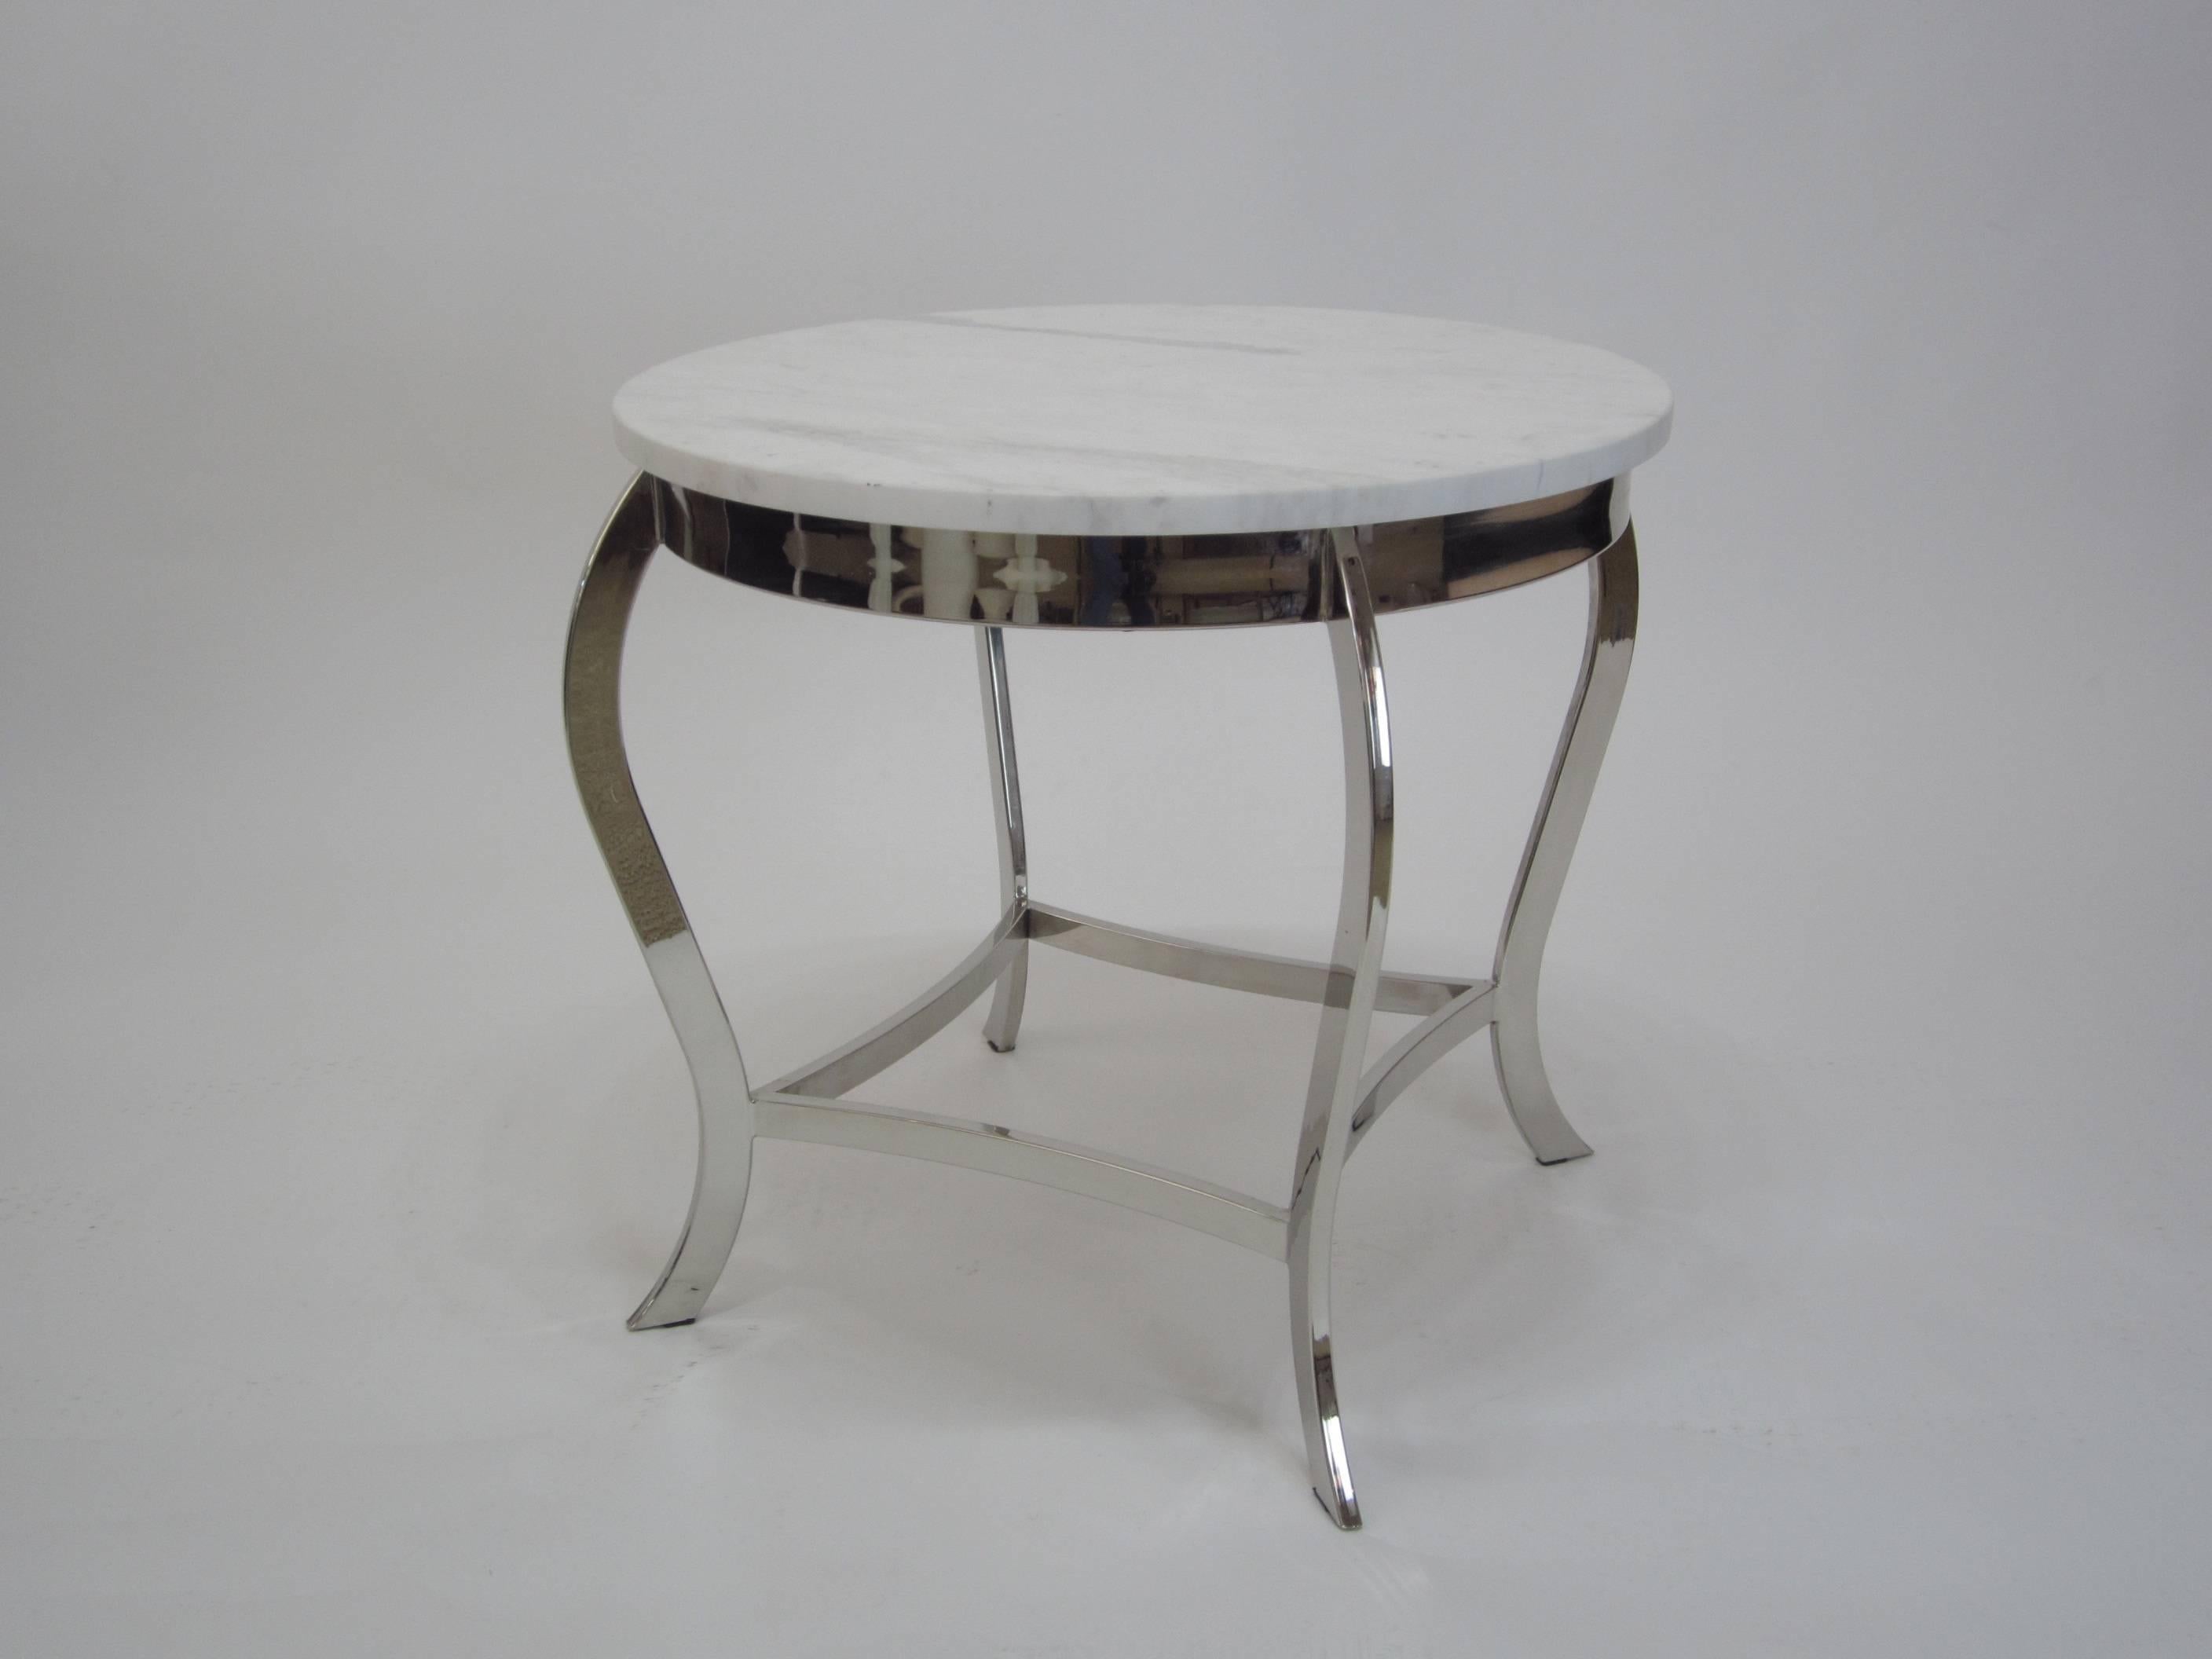 Beautiful side table in nickel with carrara marble top. The matte grey and white carrara marble top is perfectly juxtaposed with the sparkling polished nickel frame. Great in a classical room setting as well as in a contemporary setting.